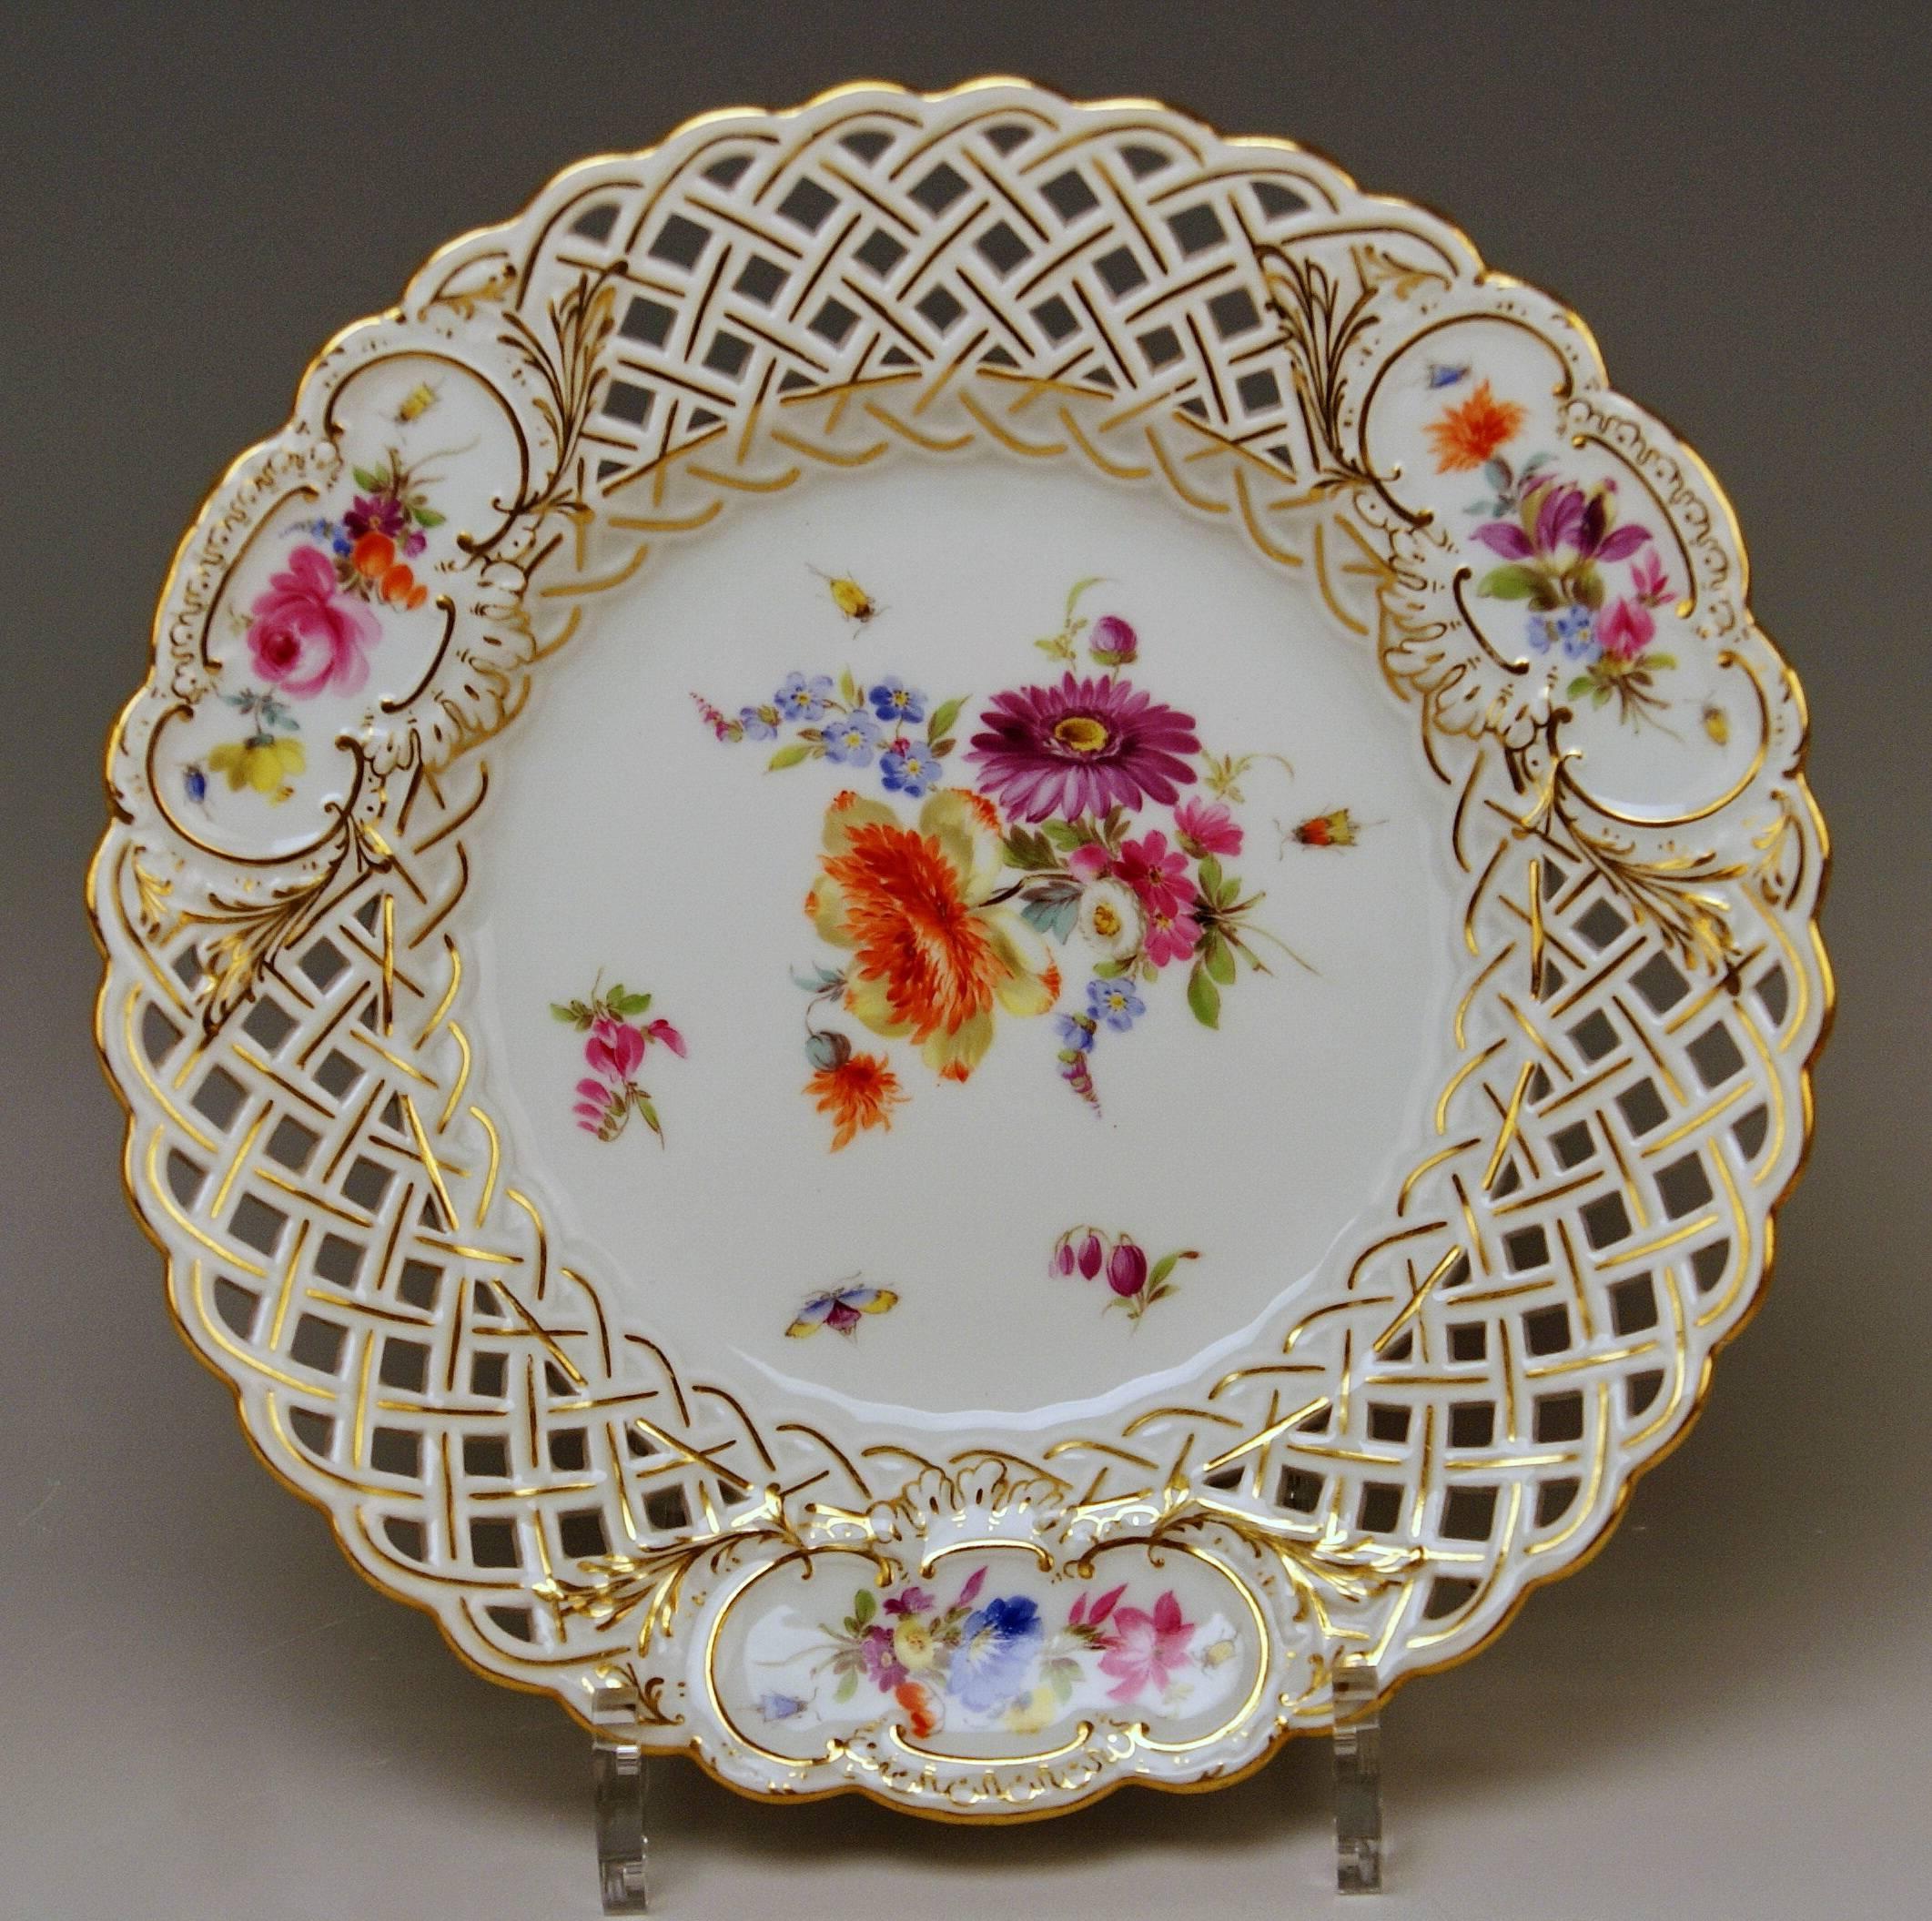 Meissen Plates Vintage Reticulated Edge Multicolored Flower Paintings circa 1870 2